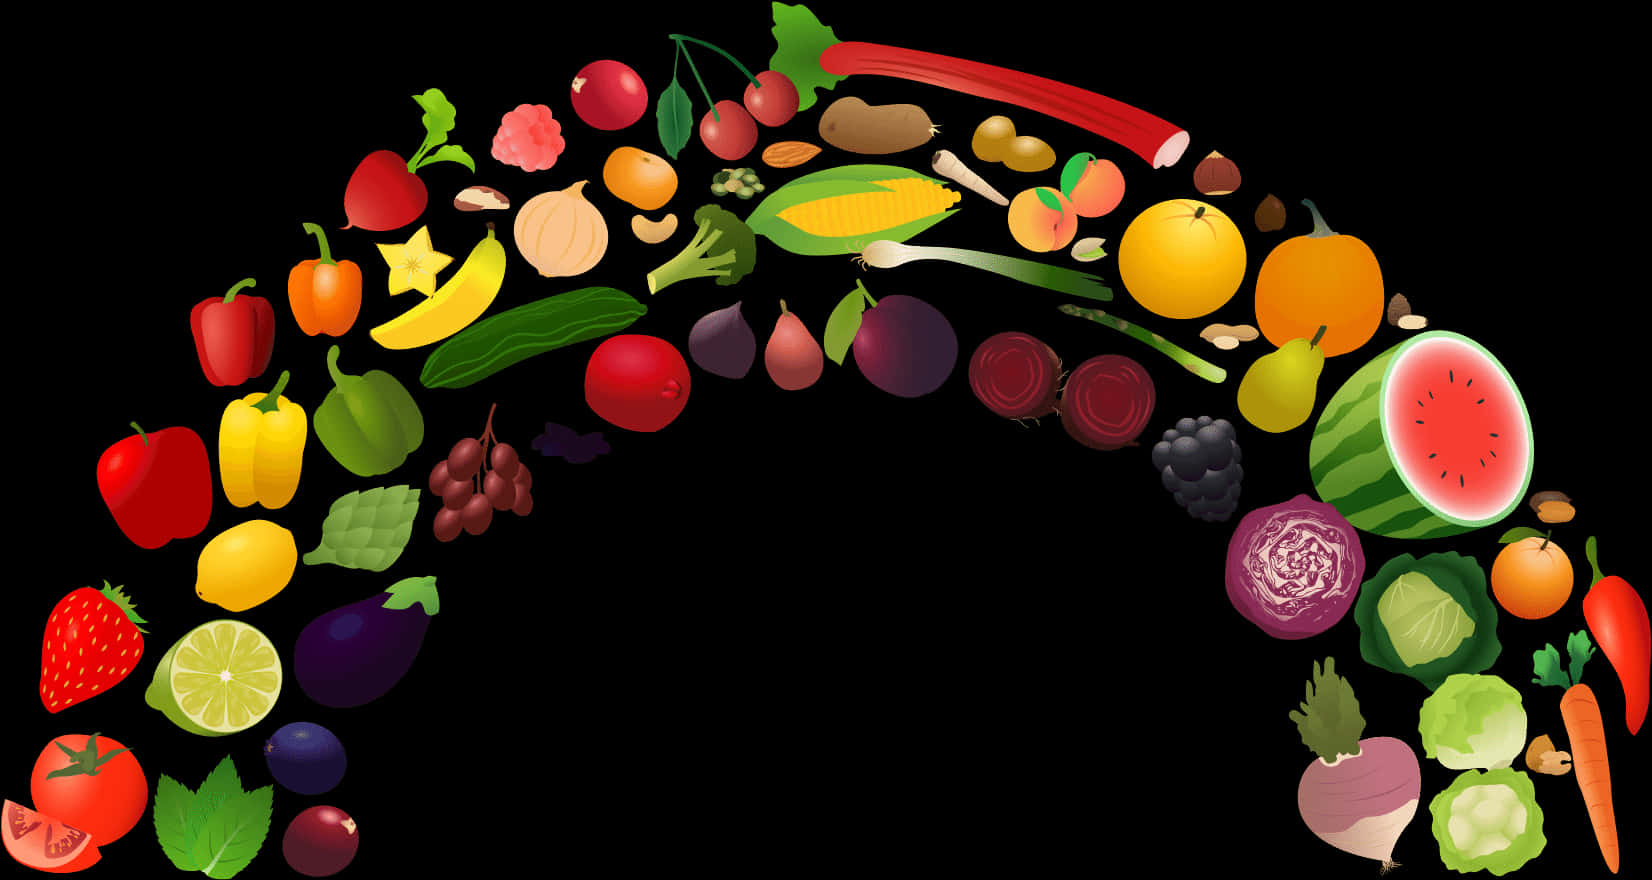 A Rainbow Of Fruits And Vegetables